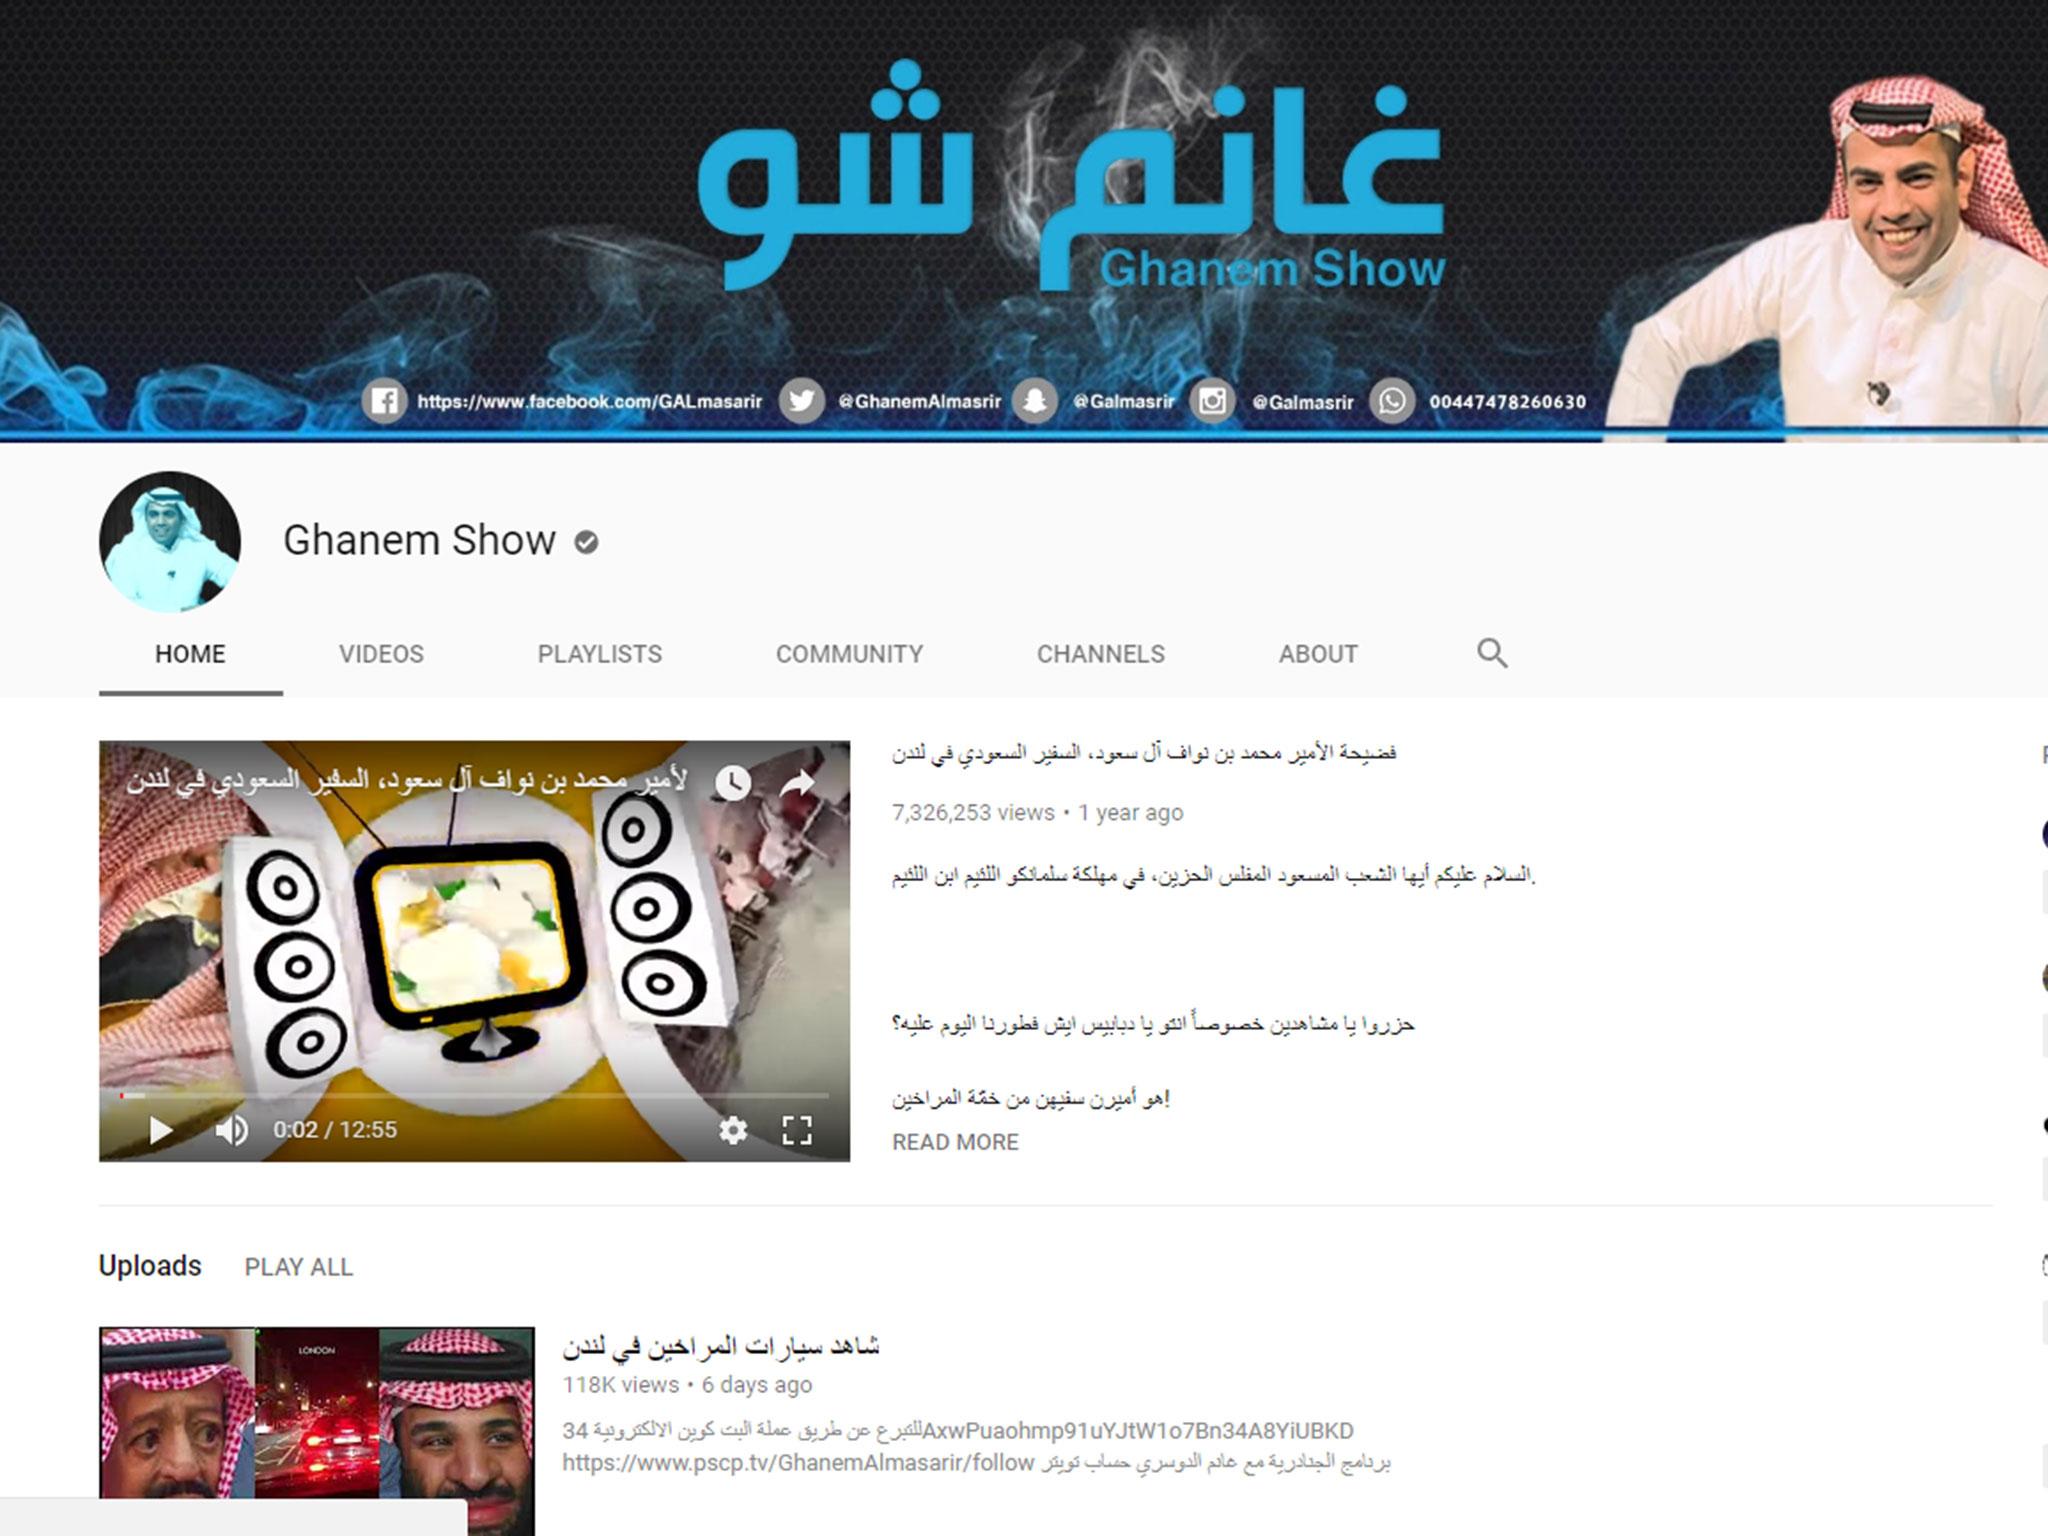 Ghanem al-Dosari’s YouTube channel, the Ghanem Show, frequently mocks the Saudi government and has hundreds of millions of views